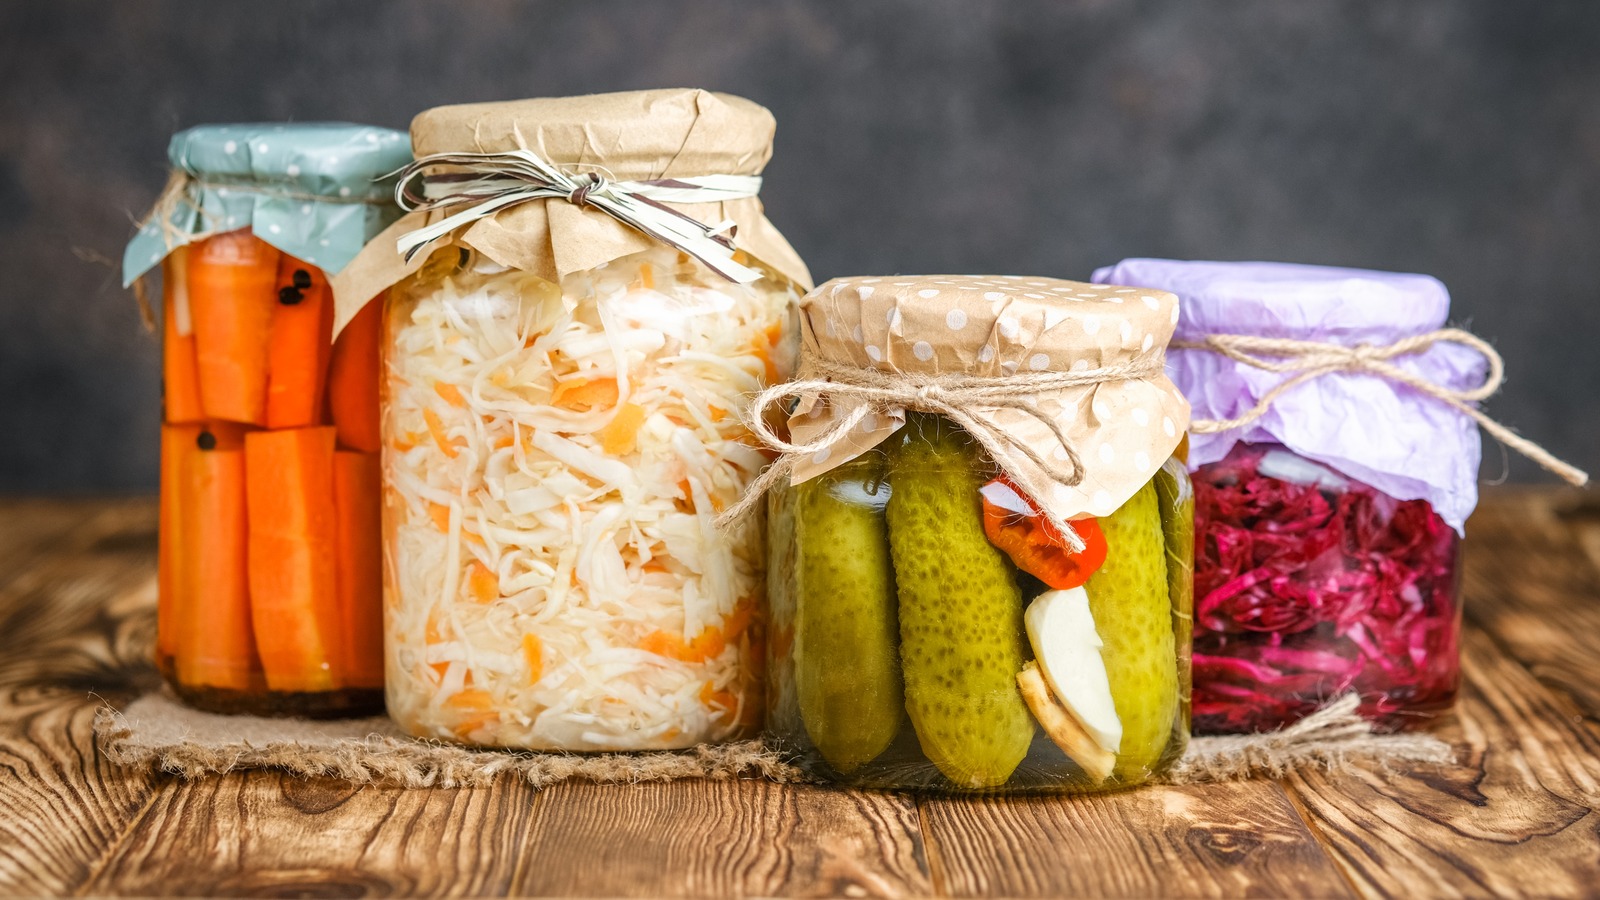 https://www.tastingtable.com/img/gallery/fermented-vs-pickled-foods-whats-the-difference/l-intro-1667856165.jpg